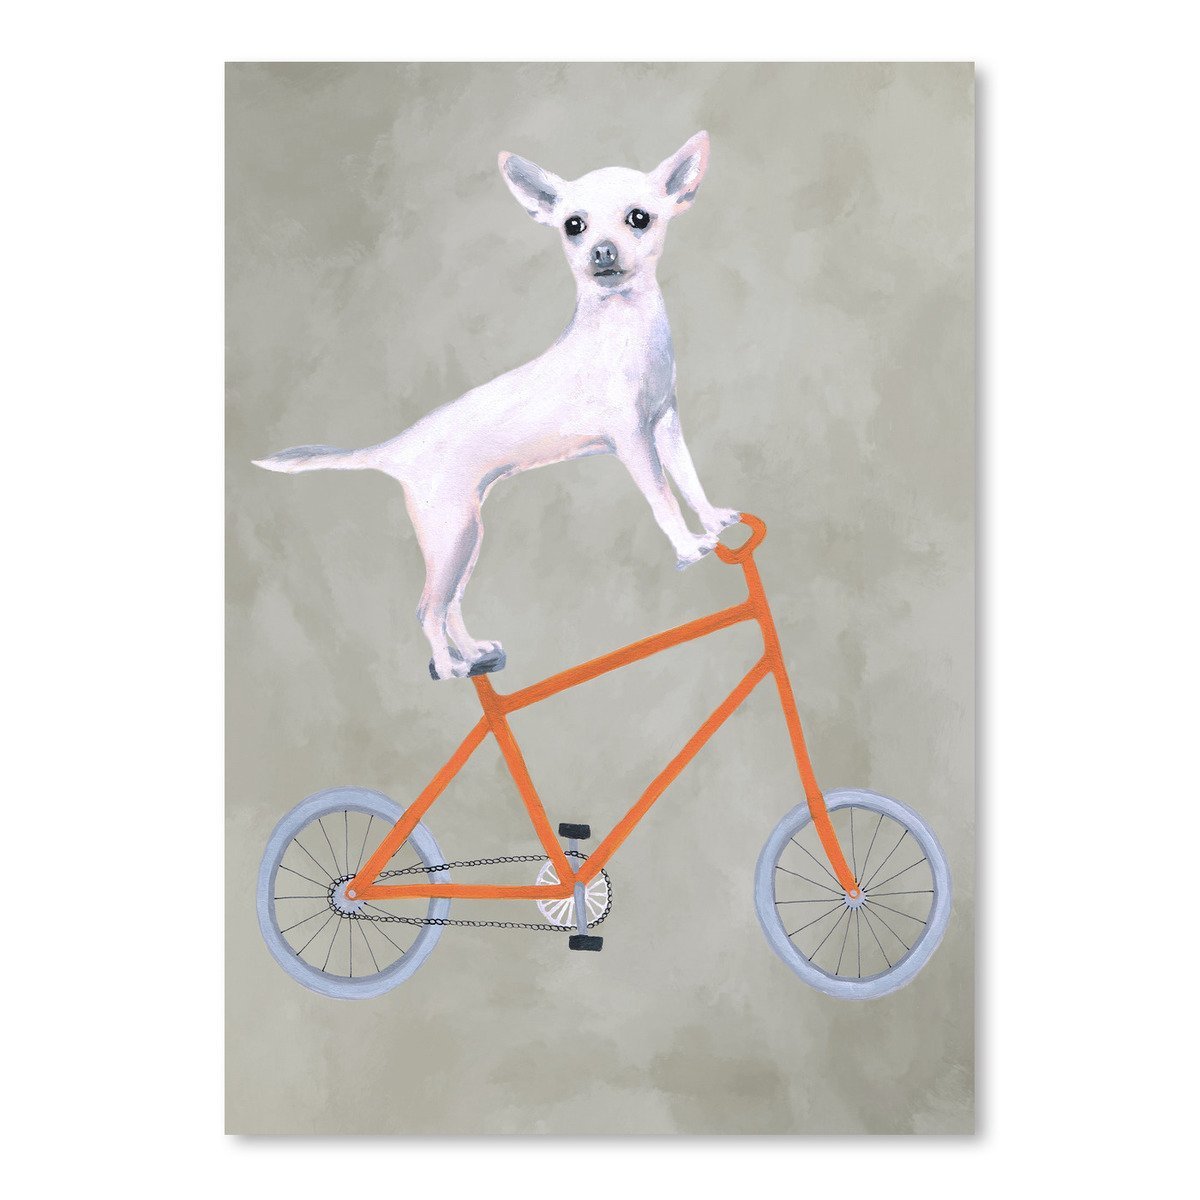 Chihuahua On Bicycle by Coco de Paris - Art Print - Americanflat